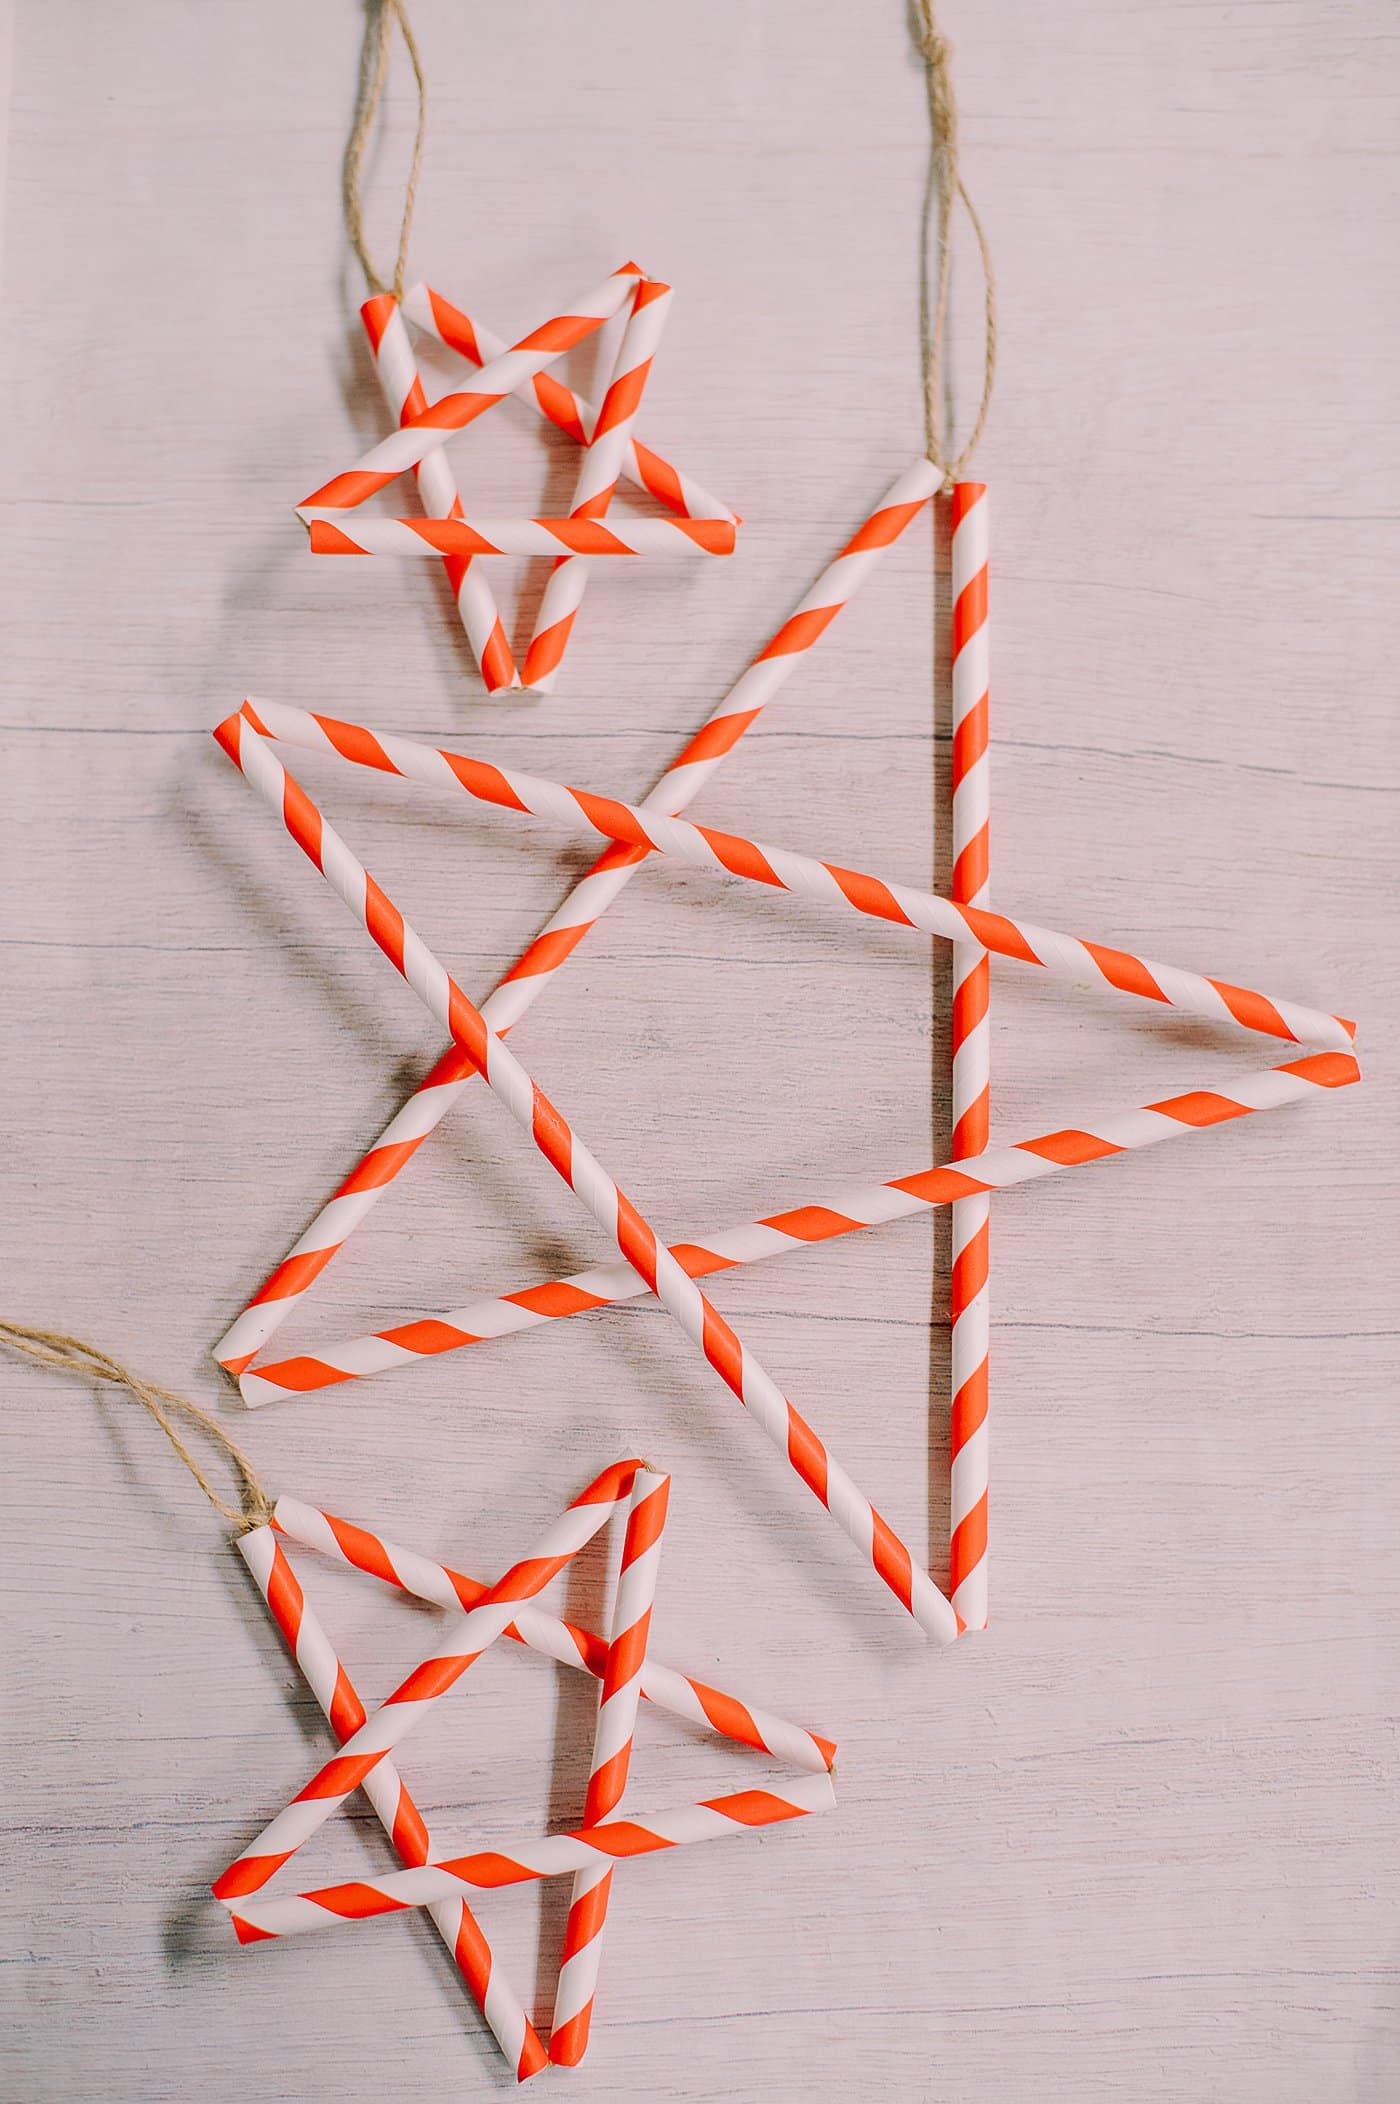 How to Make Drinking Straw Star Ornaments.